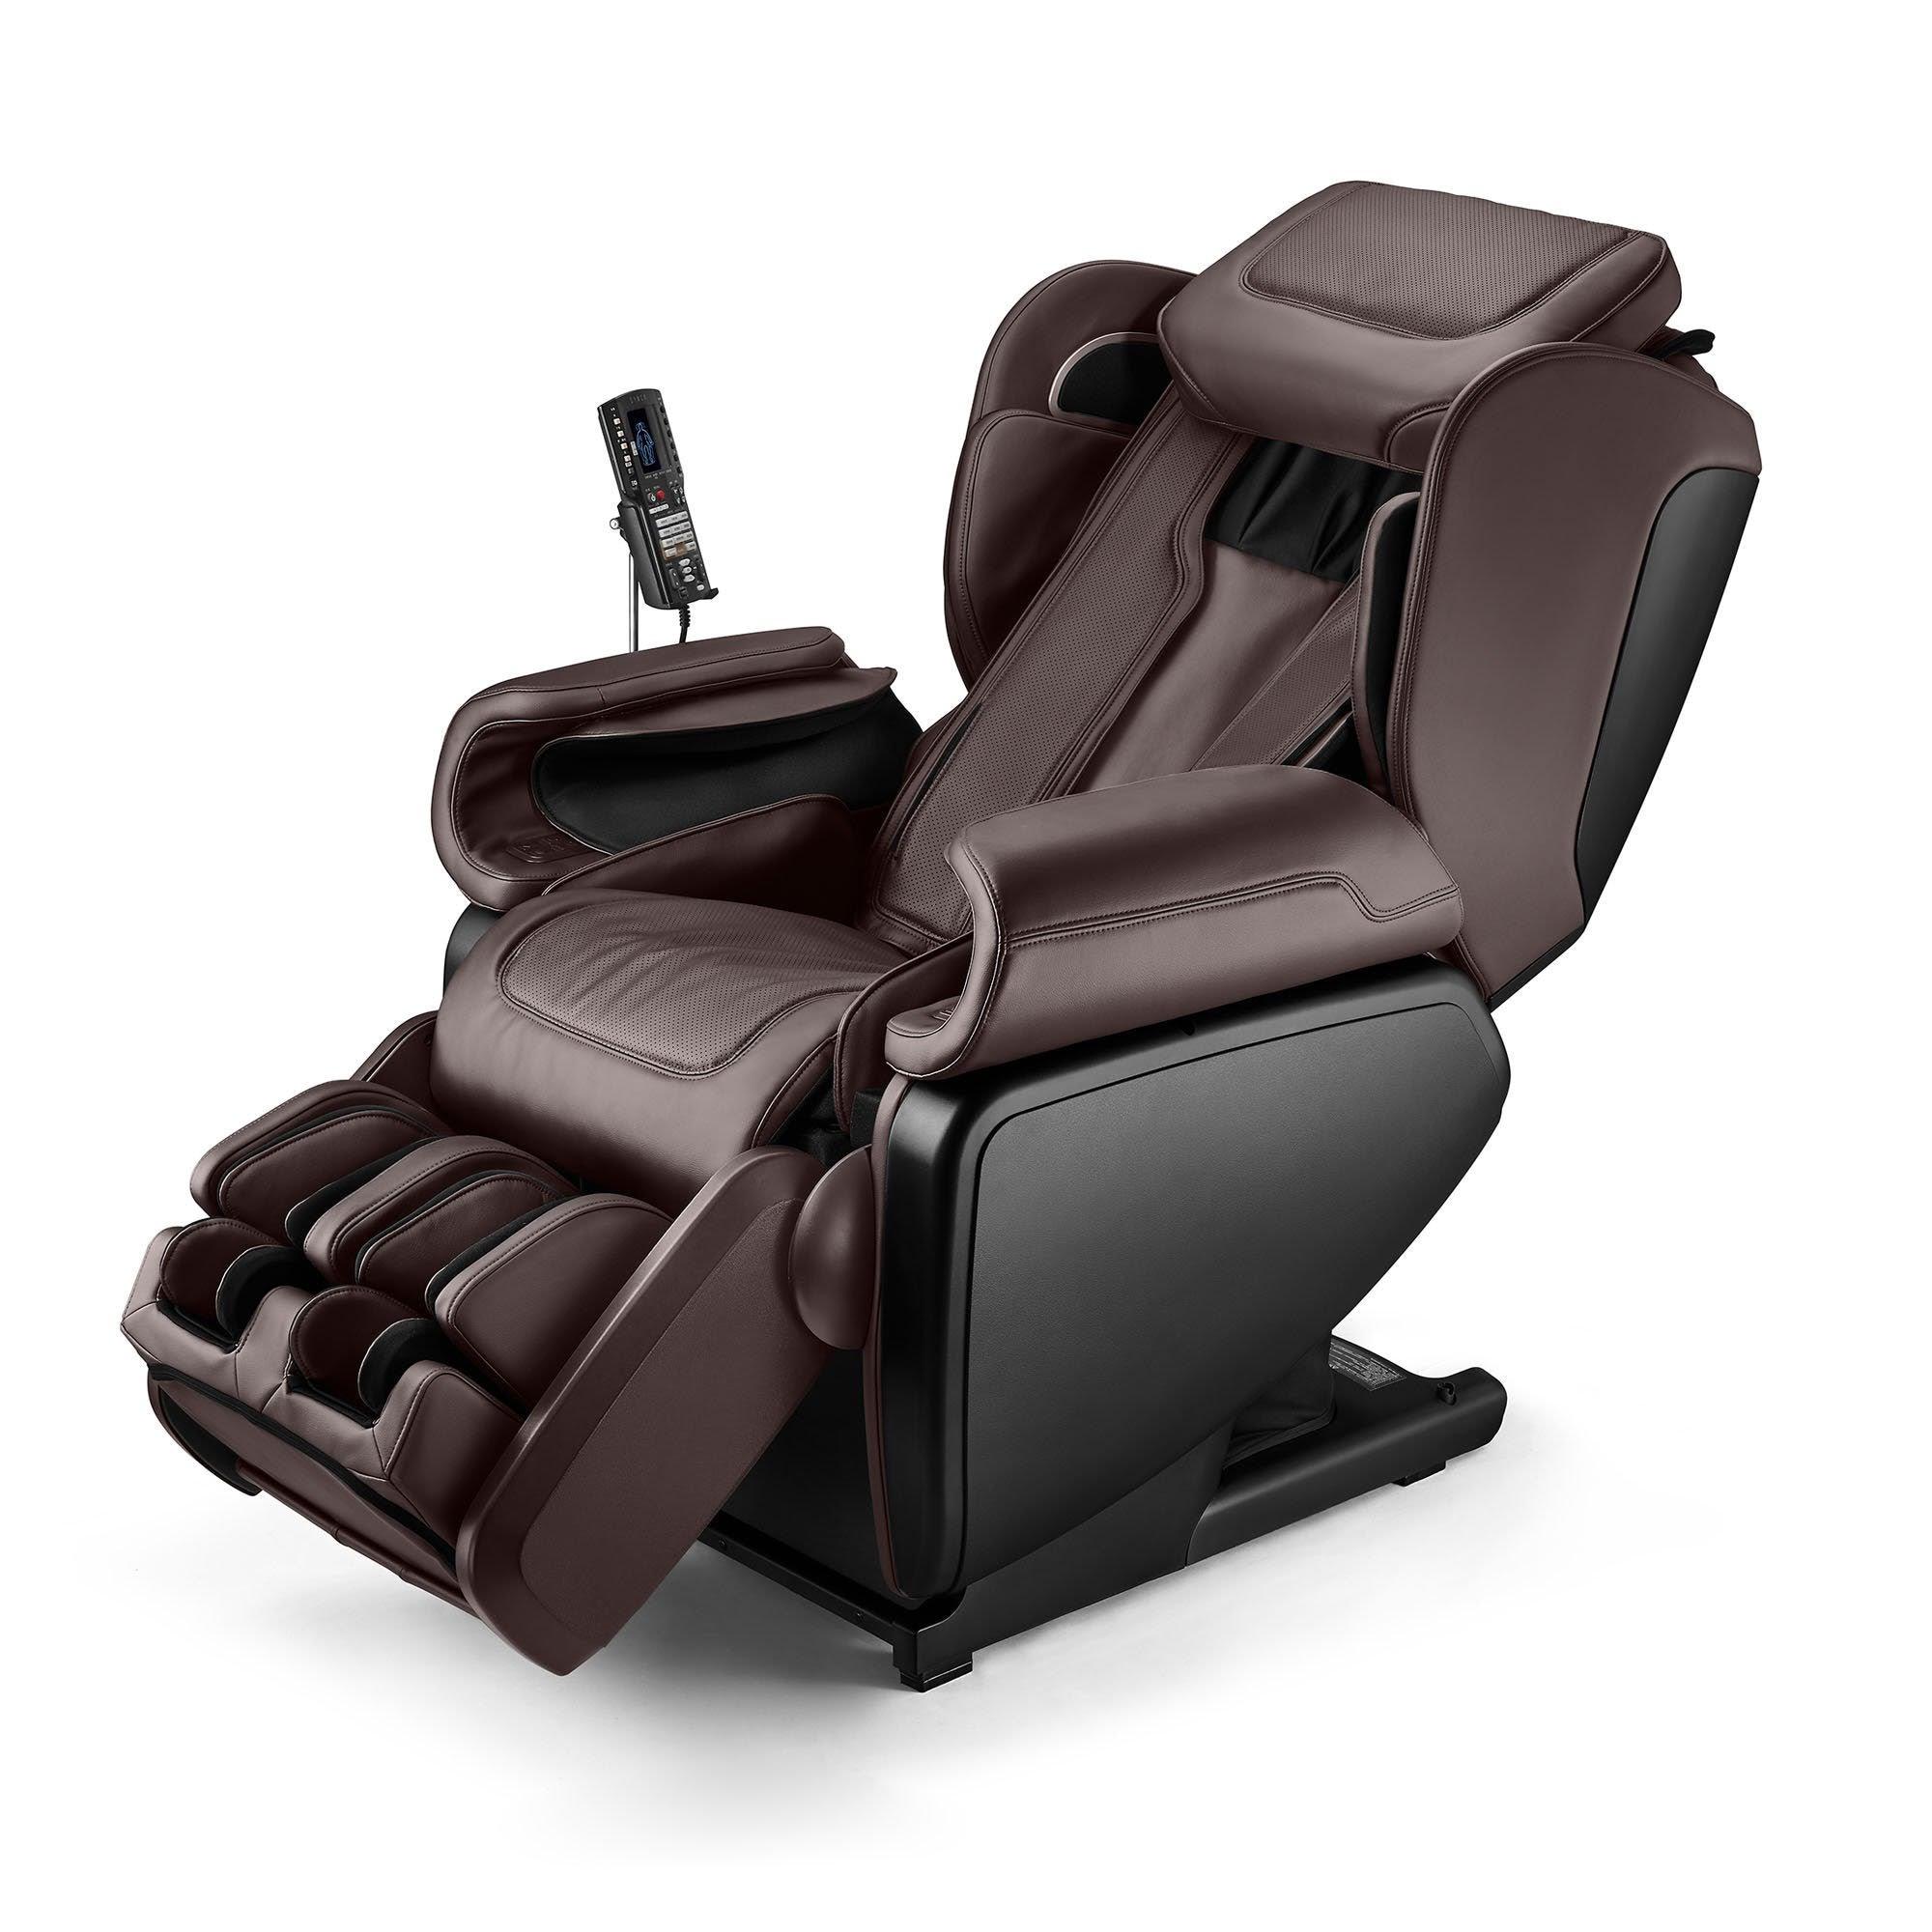 Synca Wellness Massage Chairs